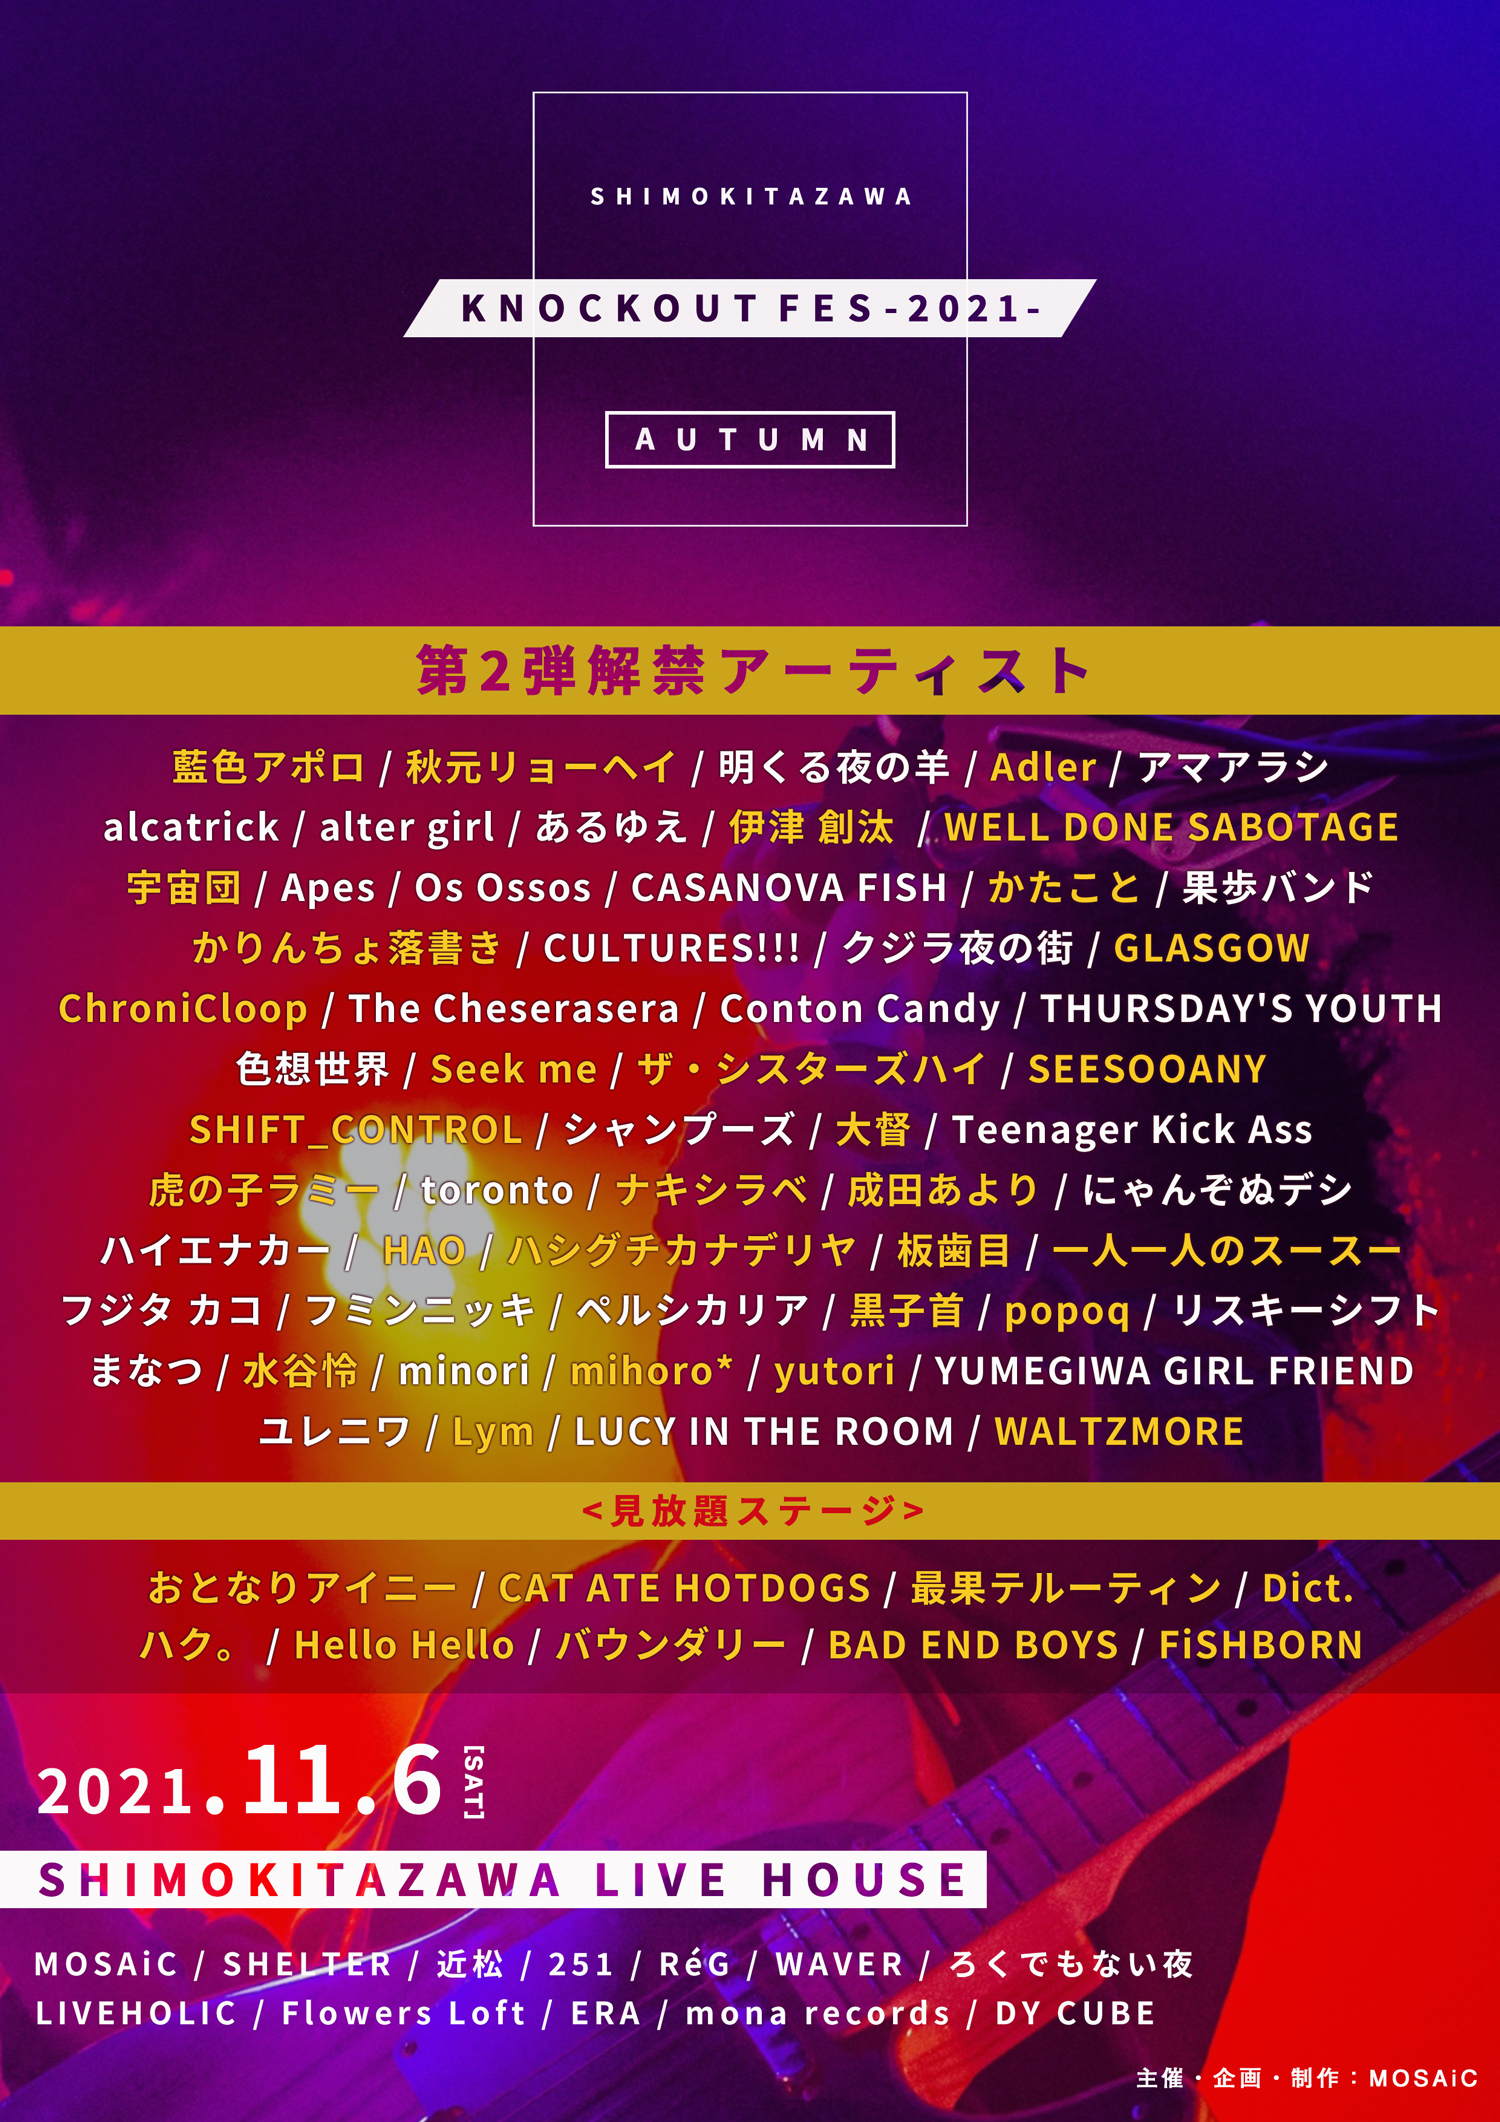 『KNOCKOUT FES 2021 autumn』第2弾解禁アーティスト